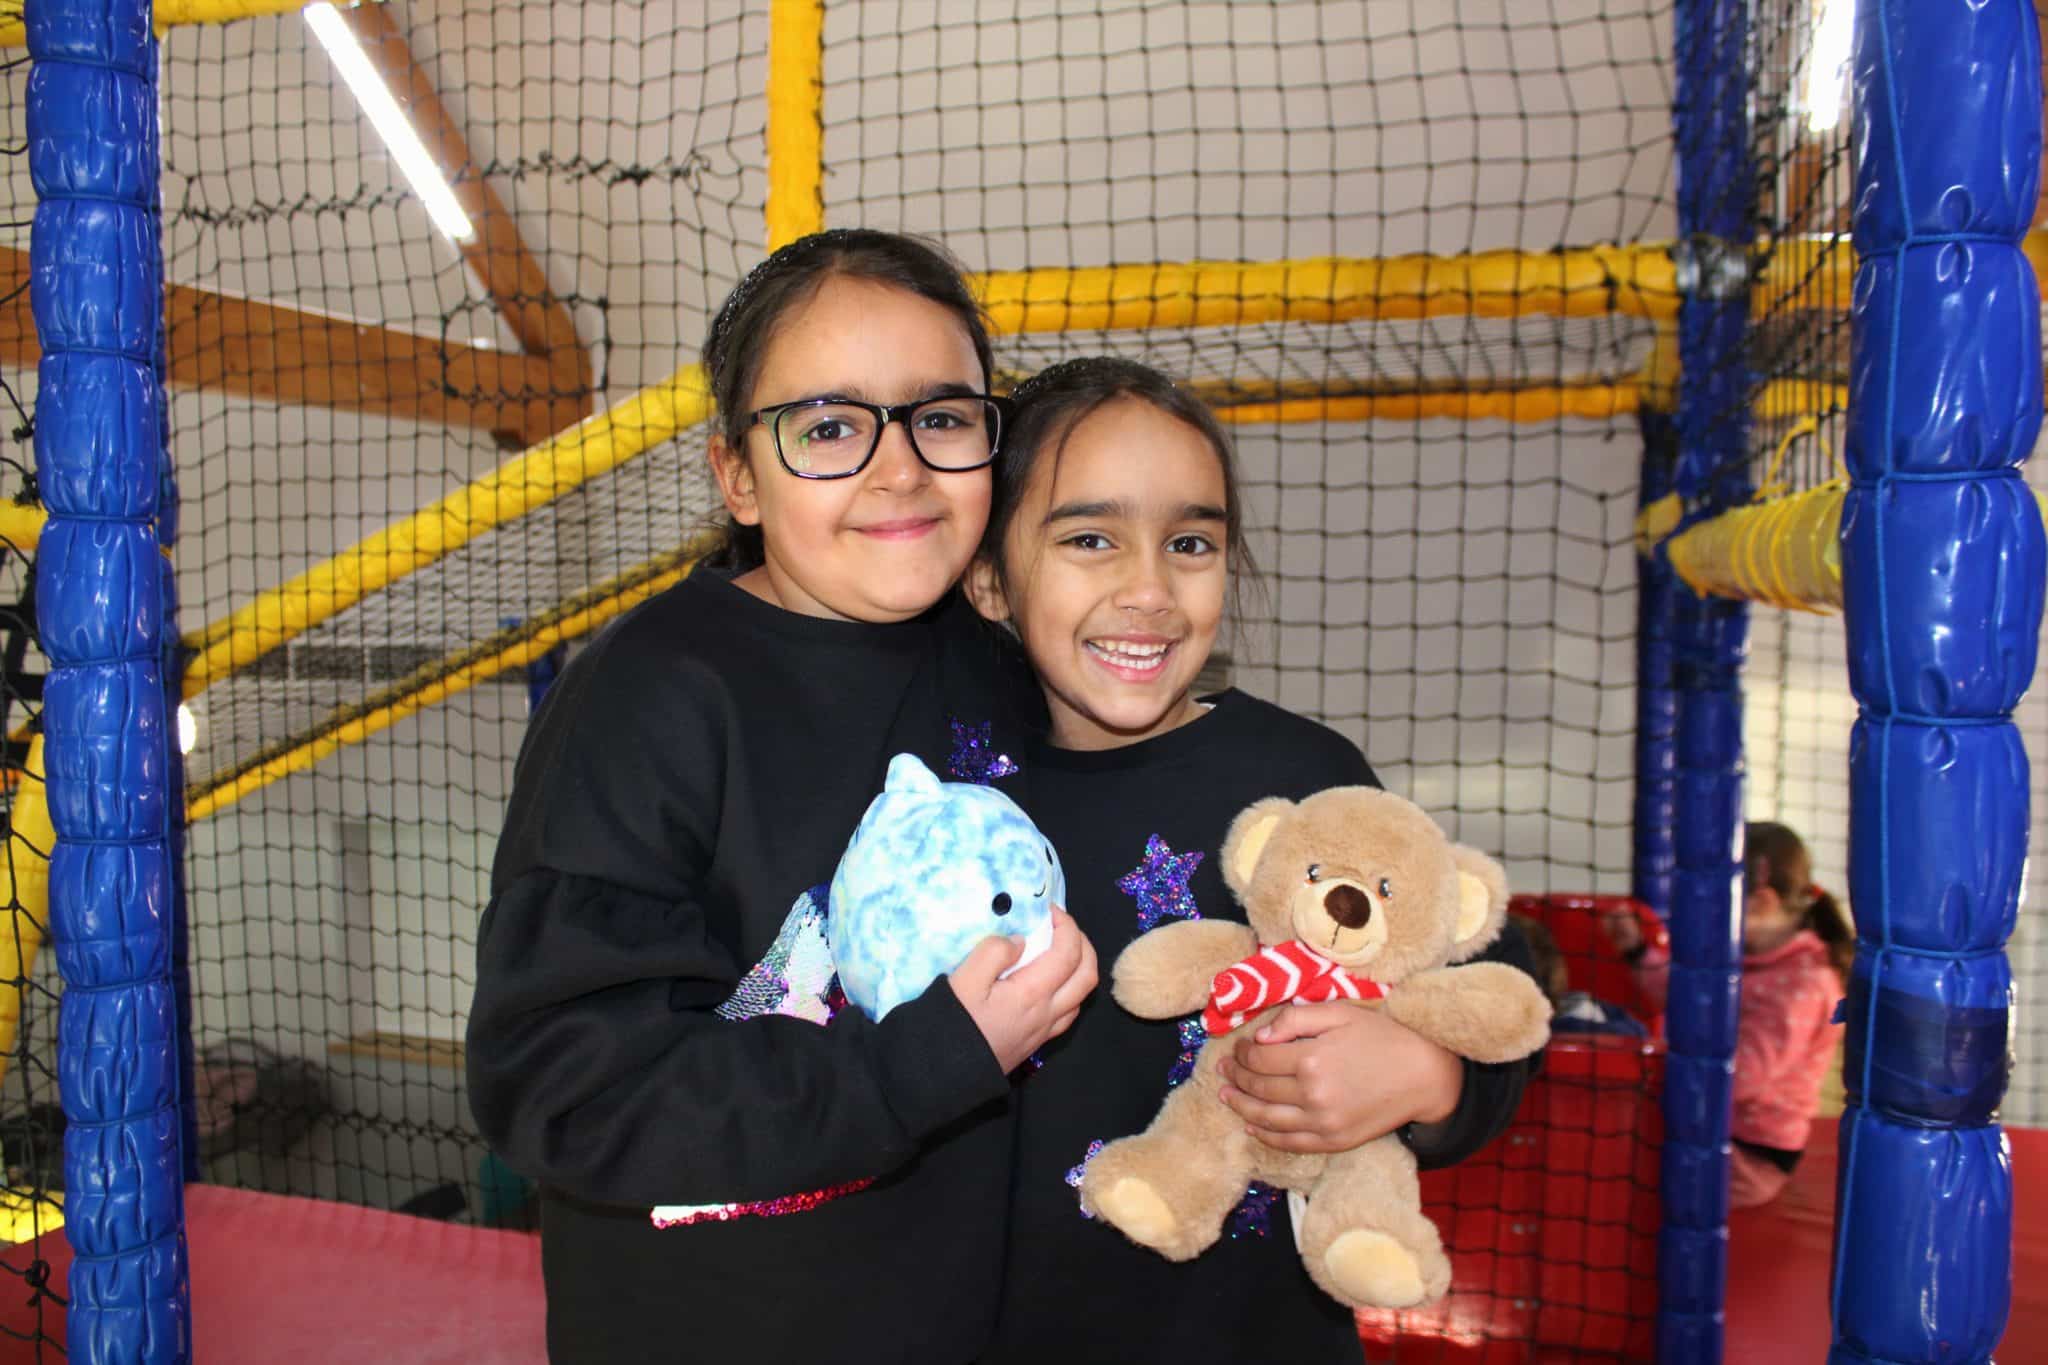 Two kids hugging and holding plushies at the soft play area